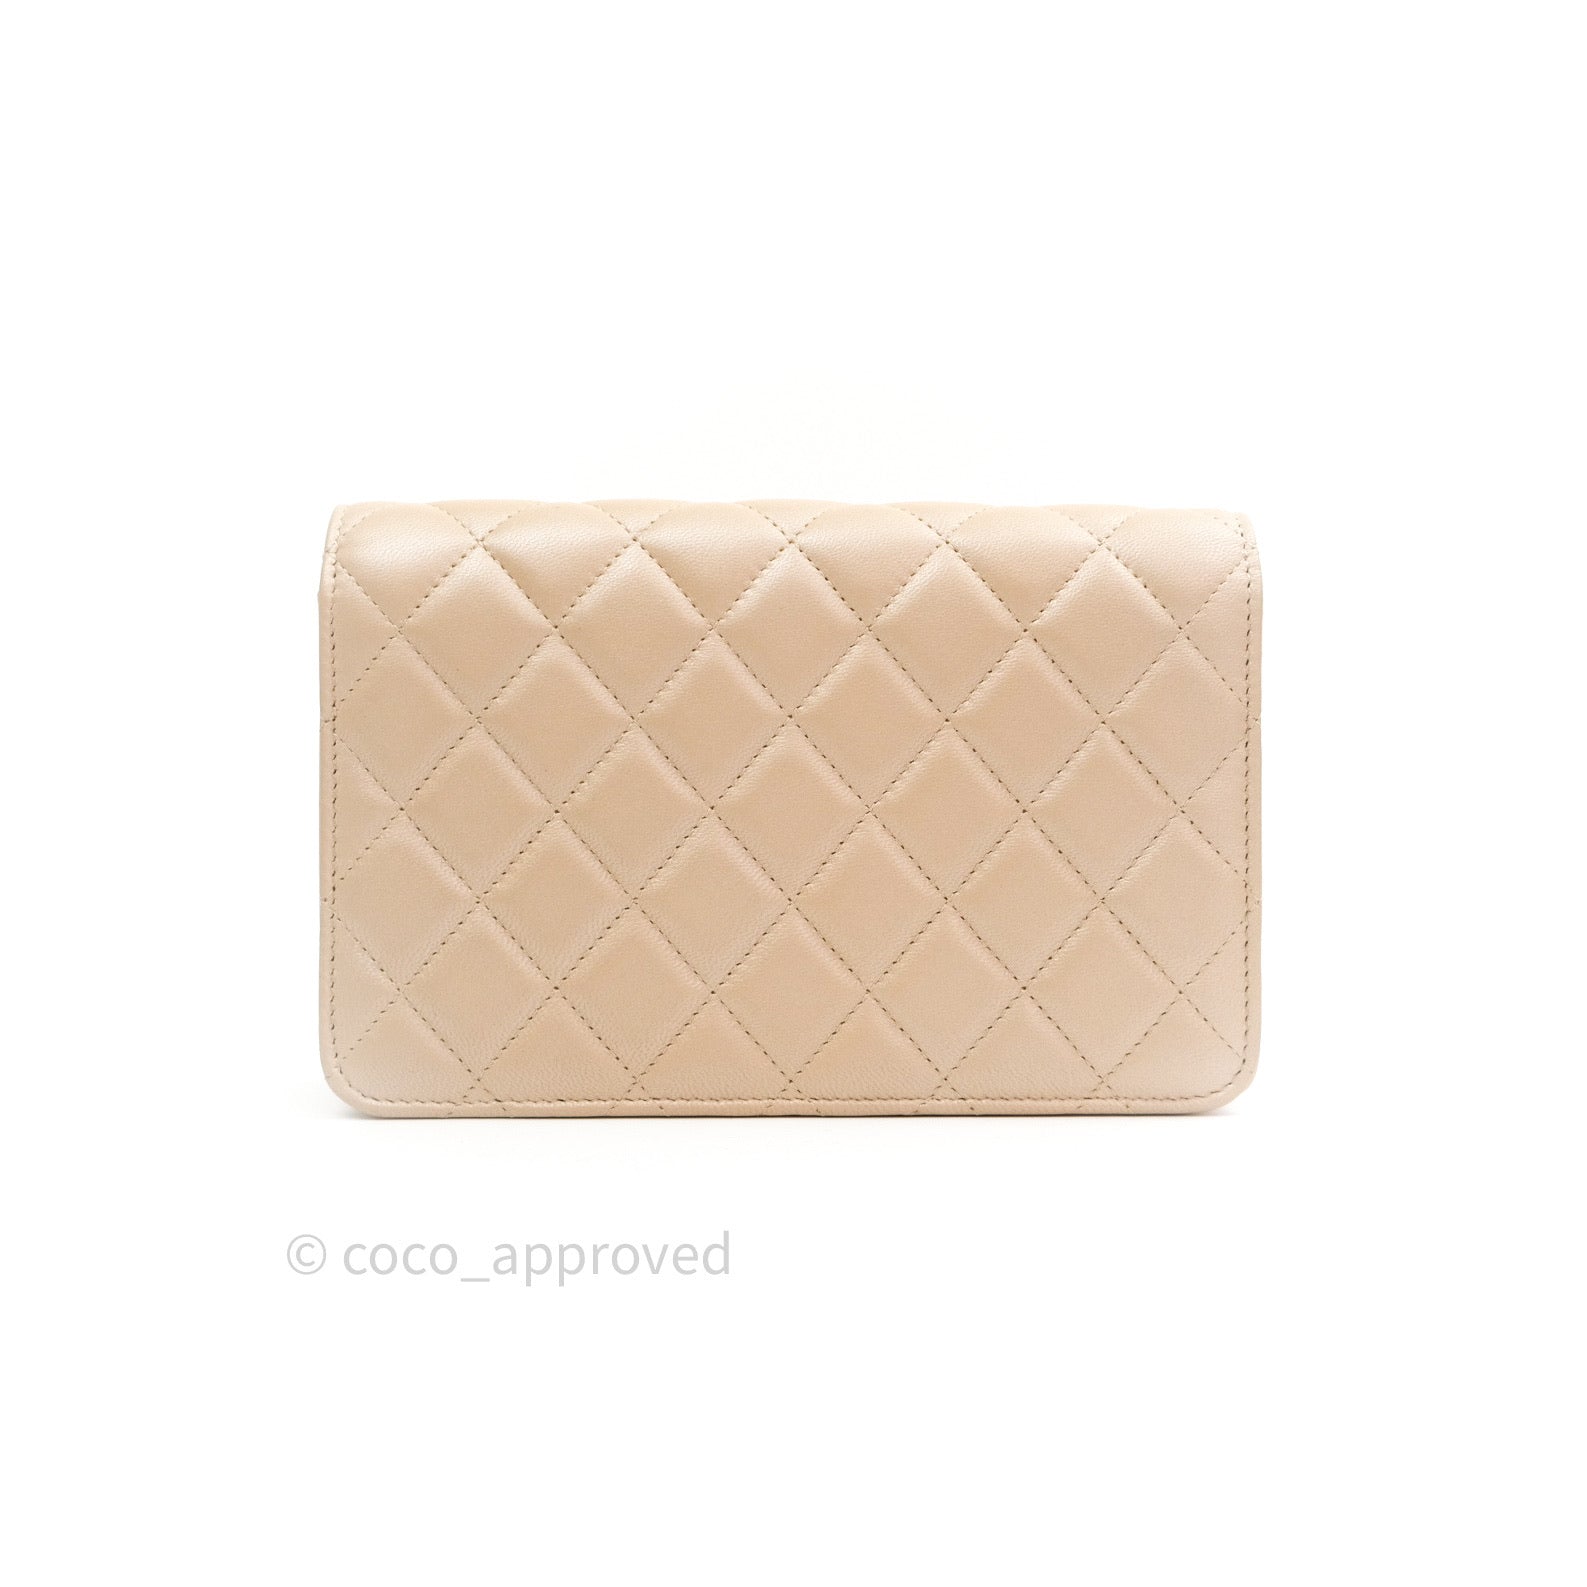 CHANEL, Bags, Not Selling Iso This Pearly Beige Chanel Woc